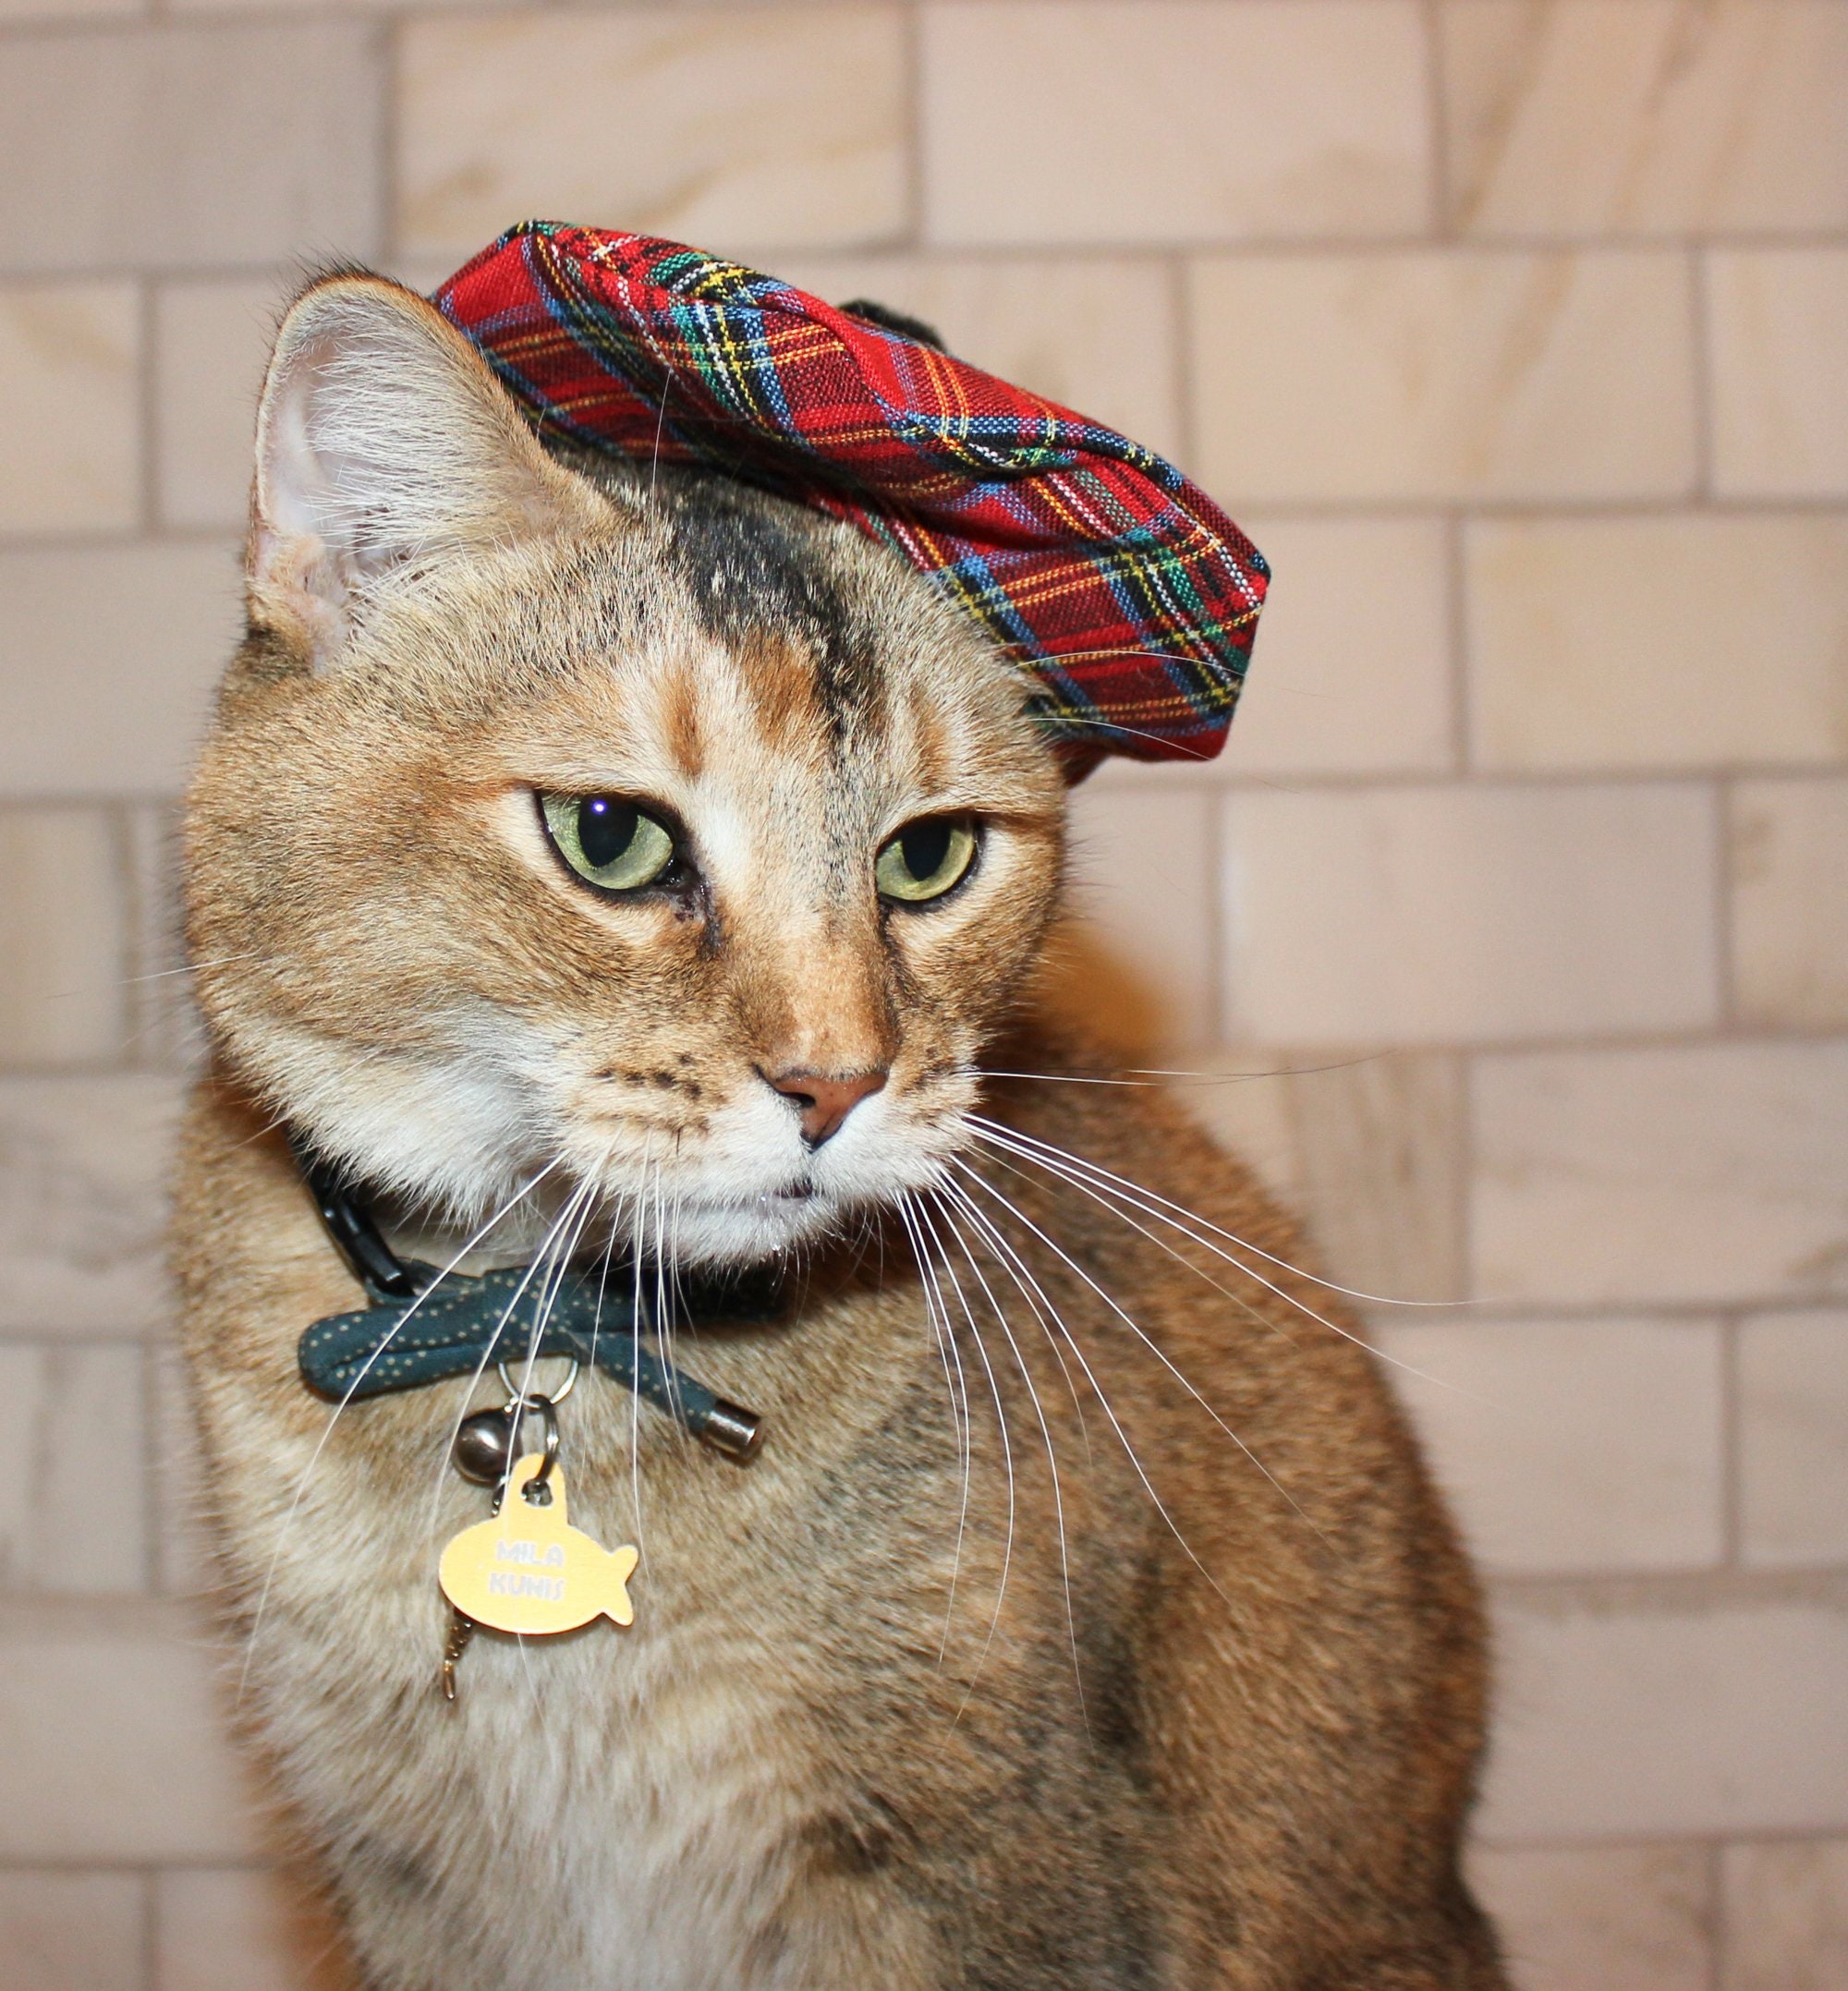 scottish-cat-hat-red-tam-beret-for-your-cat-free-shipping-etsy